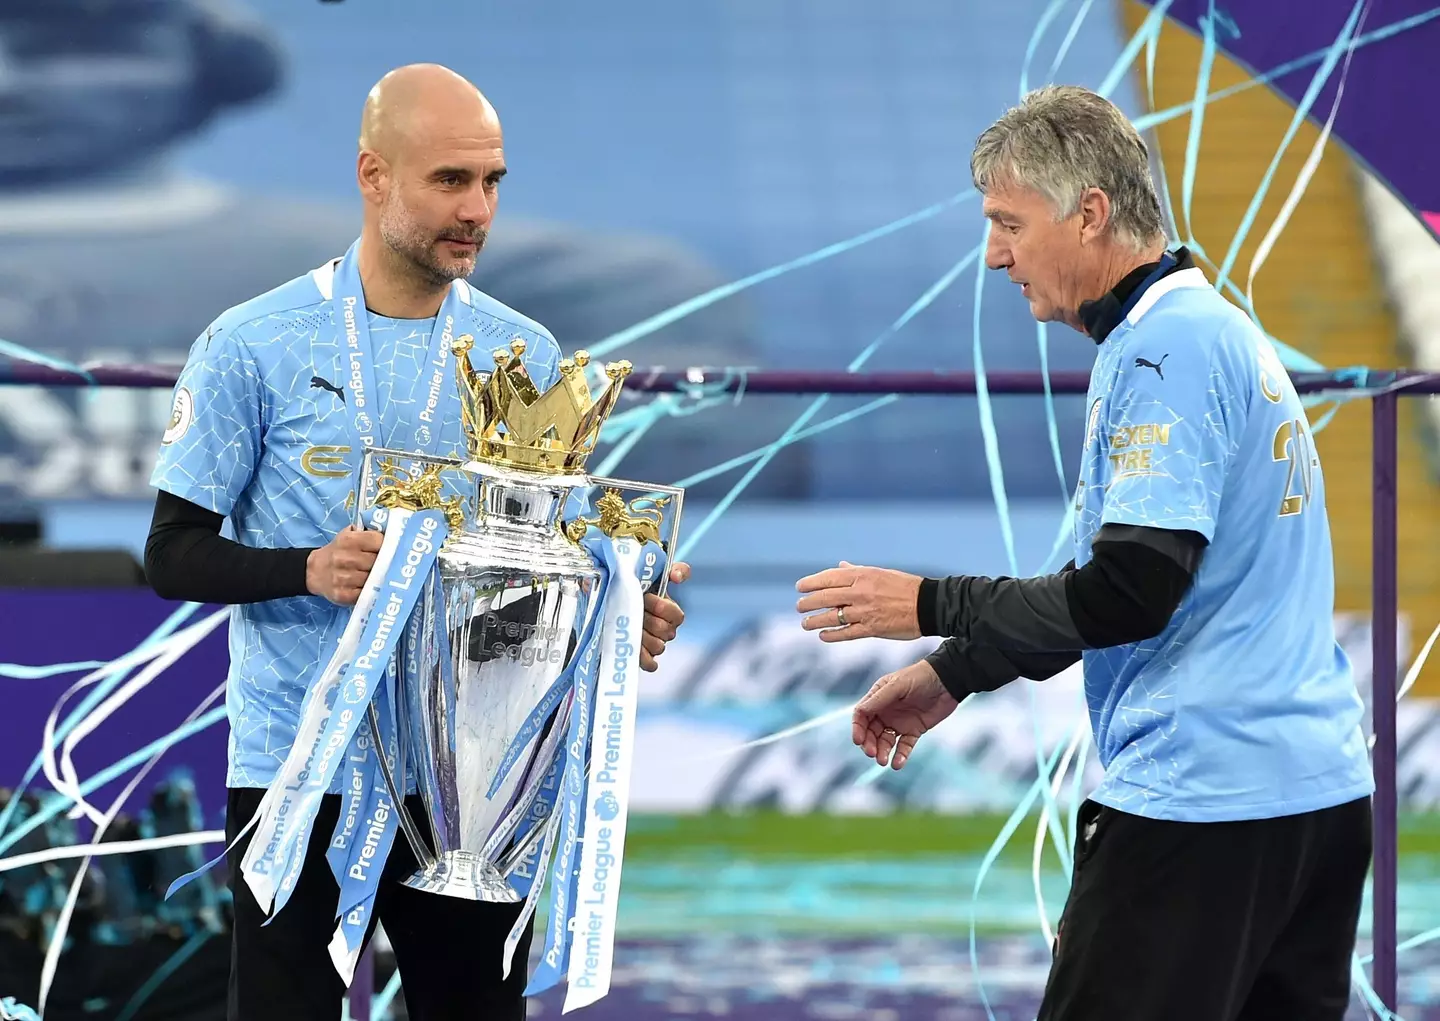 Kidd was at Guardiola's side for much of City's success. Image: PA Images